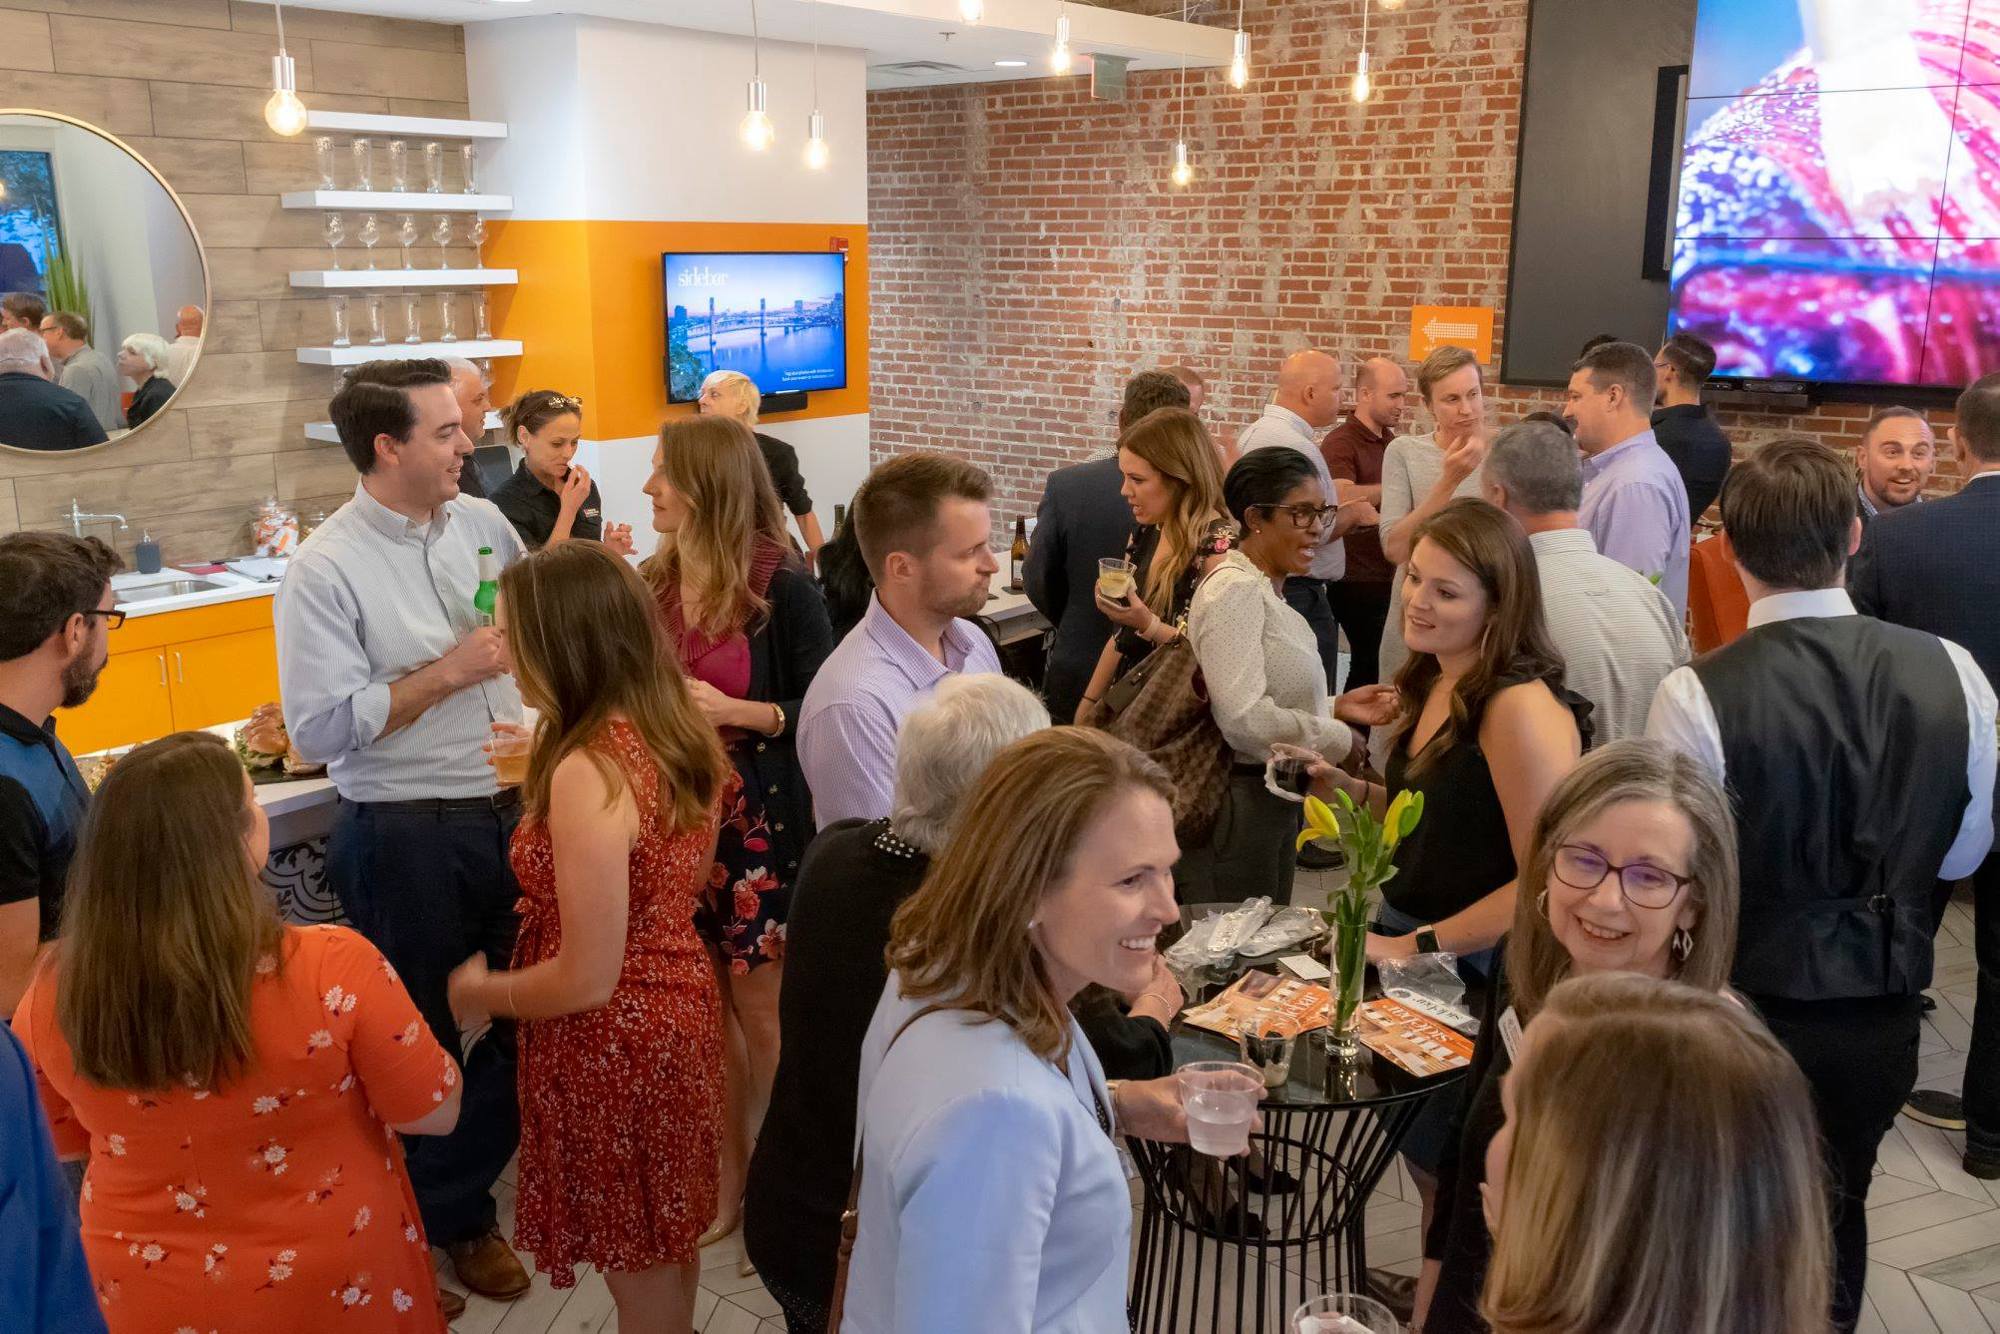 The Dalton Agency held a preview party for Sidebar on Friday. The 2,000-square-foot venue features an interactive video wall, bar area, coffee counter and a full catering kitchen.